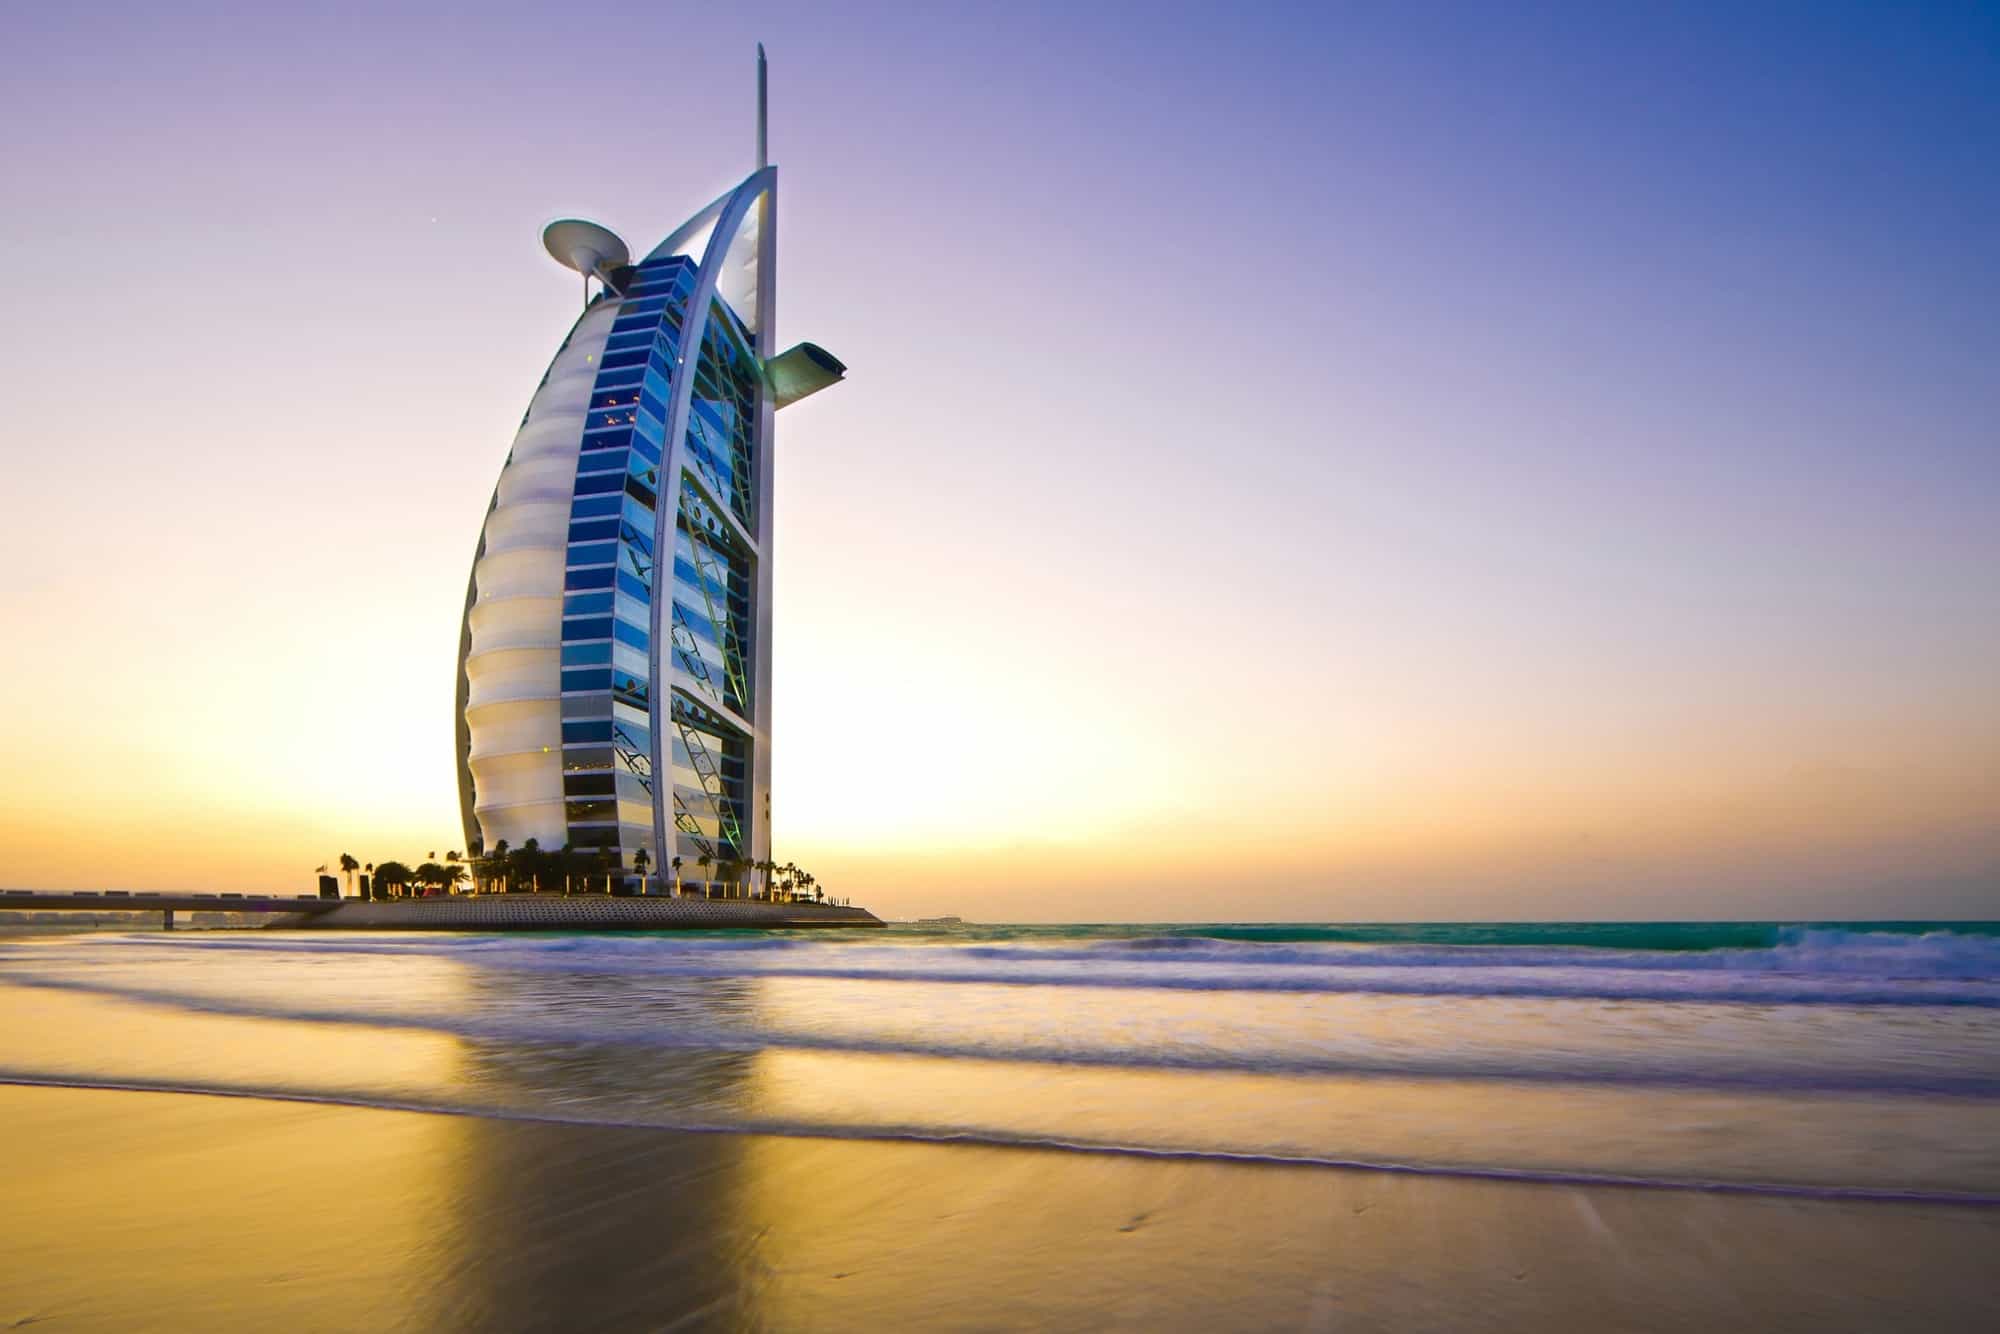 27 Interesting Facts About Dubai for Curious Travellers